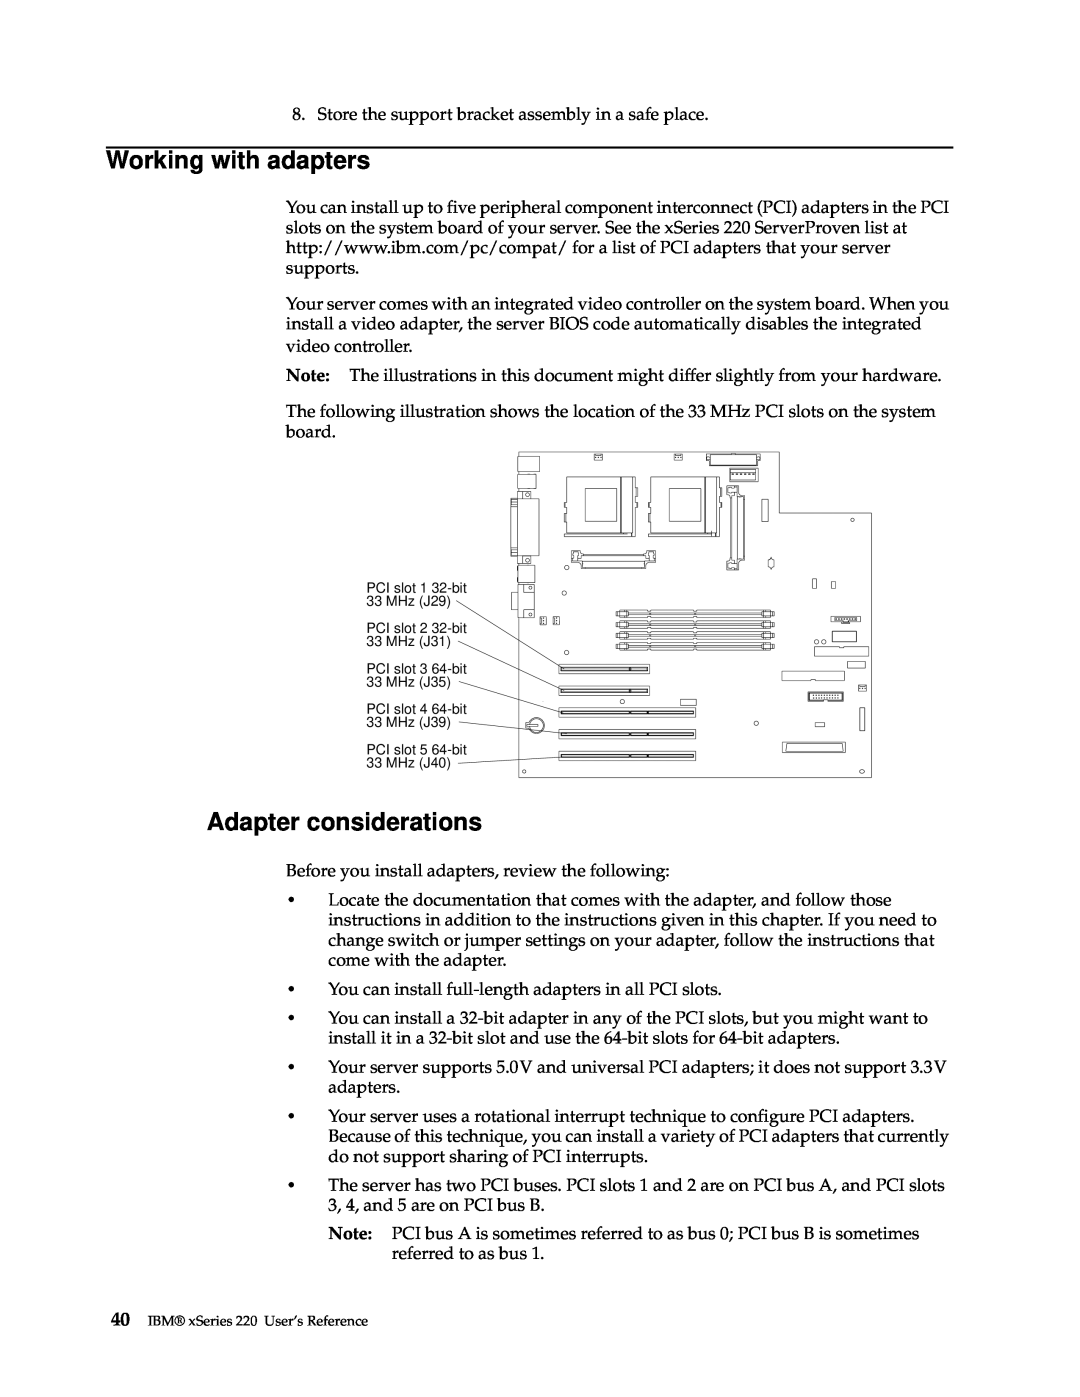 IBM manual Working with adapters, Adapter considerations, IBM xSeries 220 User’s Reference 